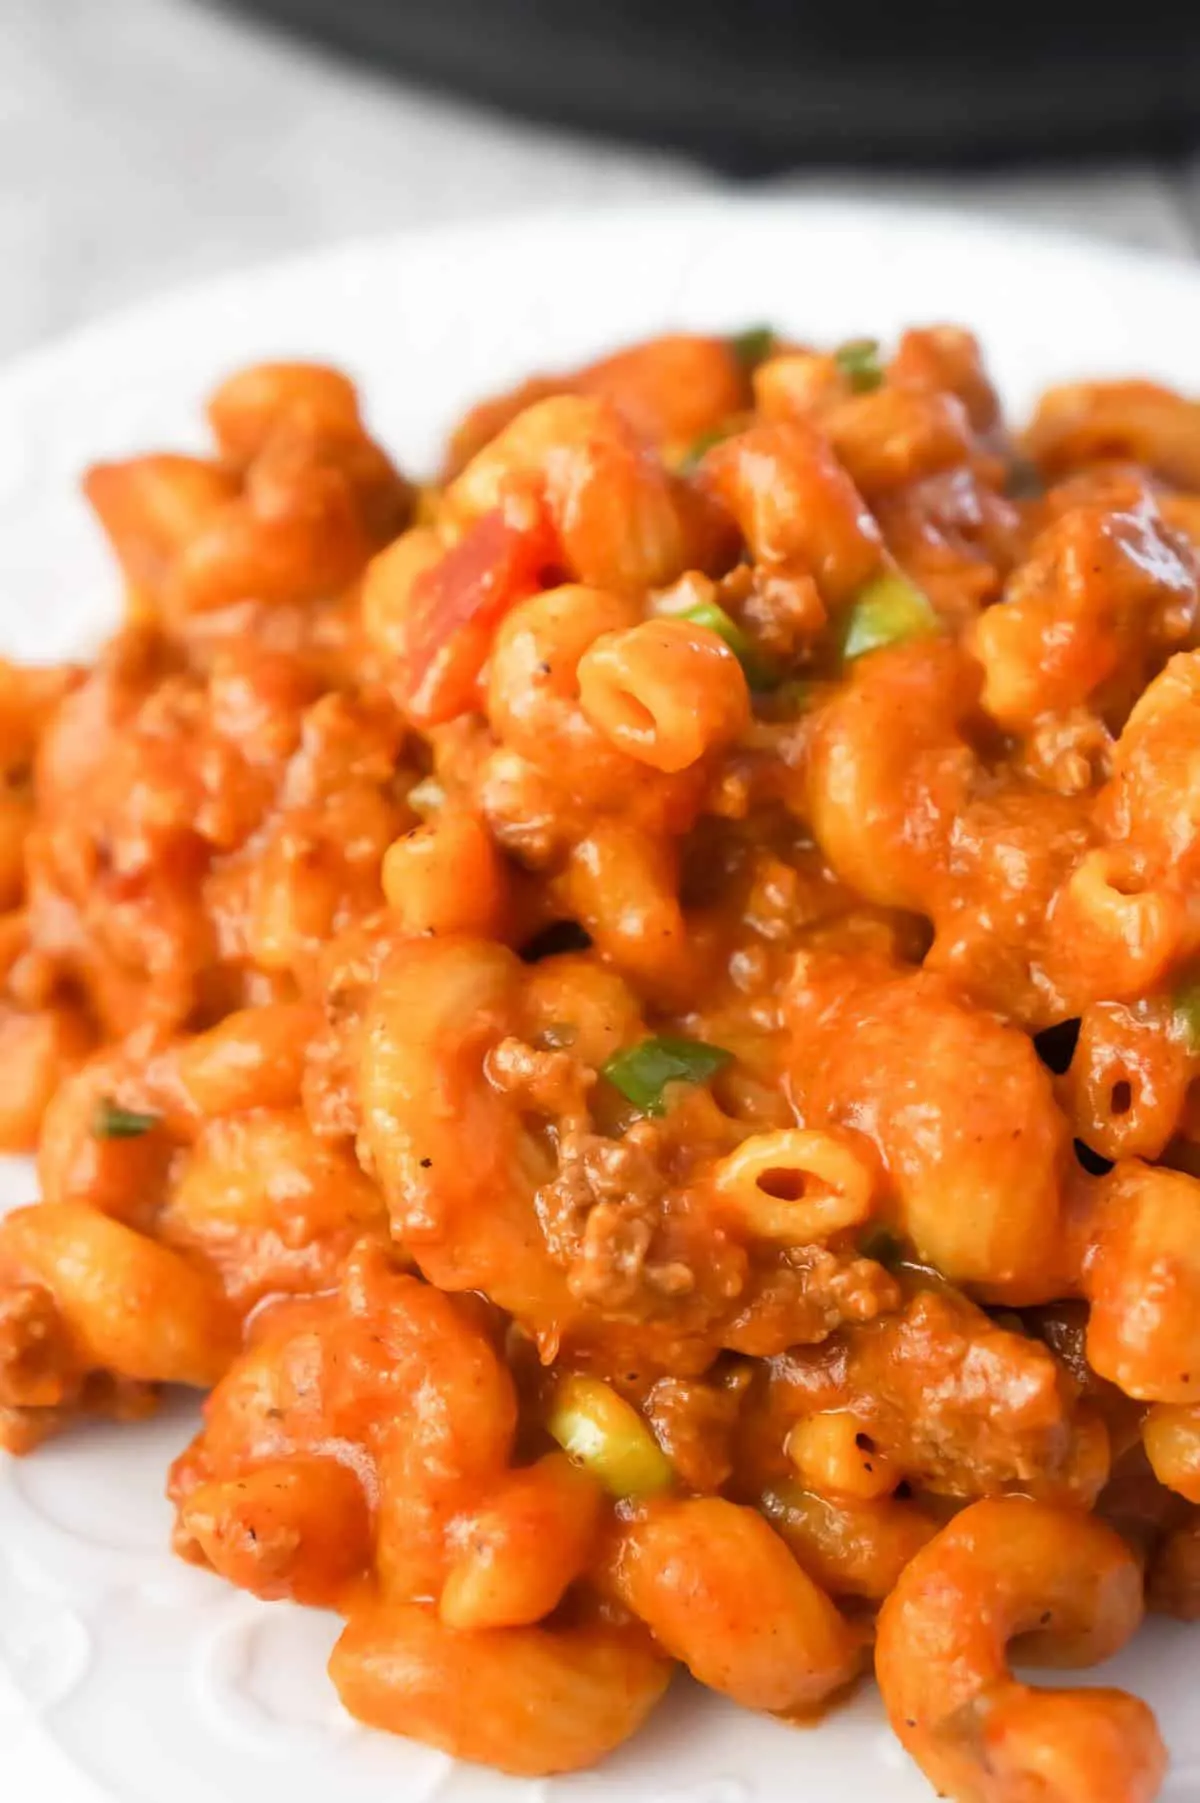 Instant Pot Cheesy Taco Pasta is a delicious pressure cooker pasta recipe loaded with ground beef, salsa, chili sauce, taco seasoning, chopped green onions and shredded cheese.